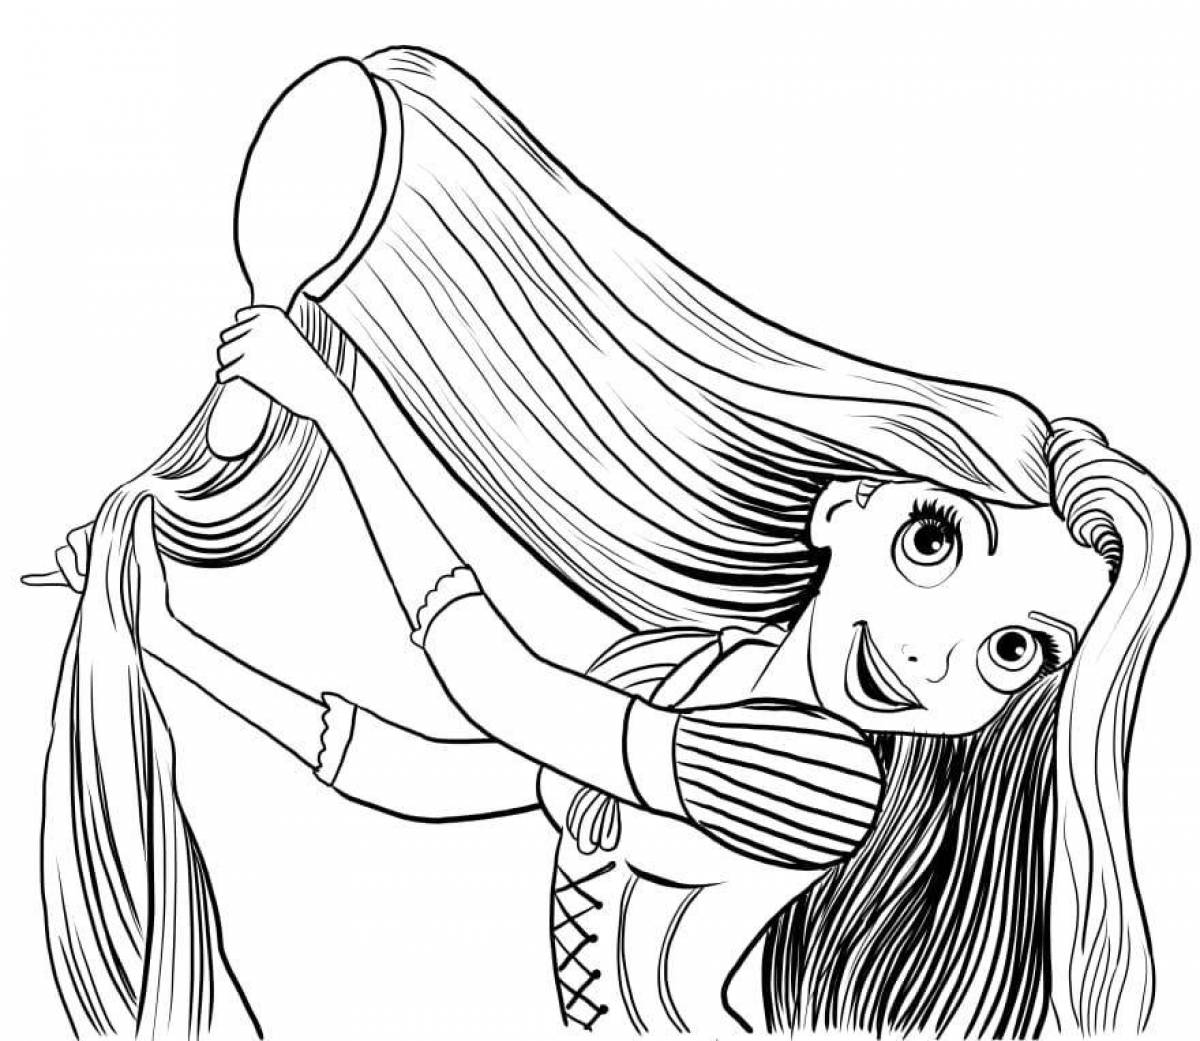 Coloring book of a girl with long hair